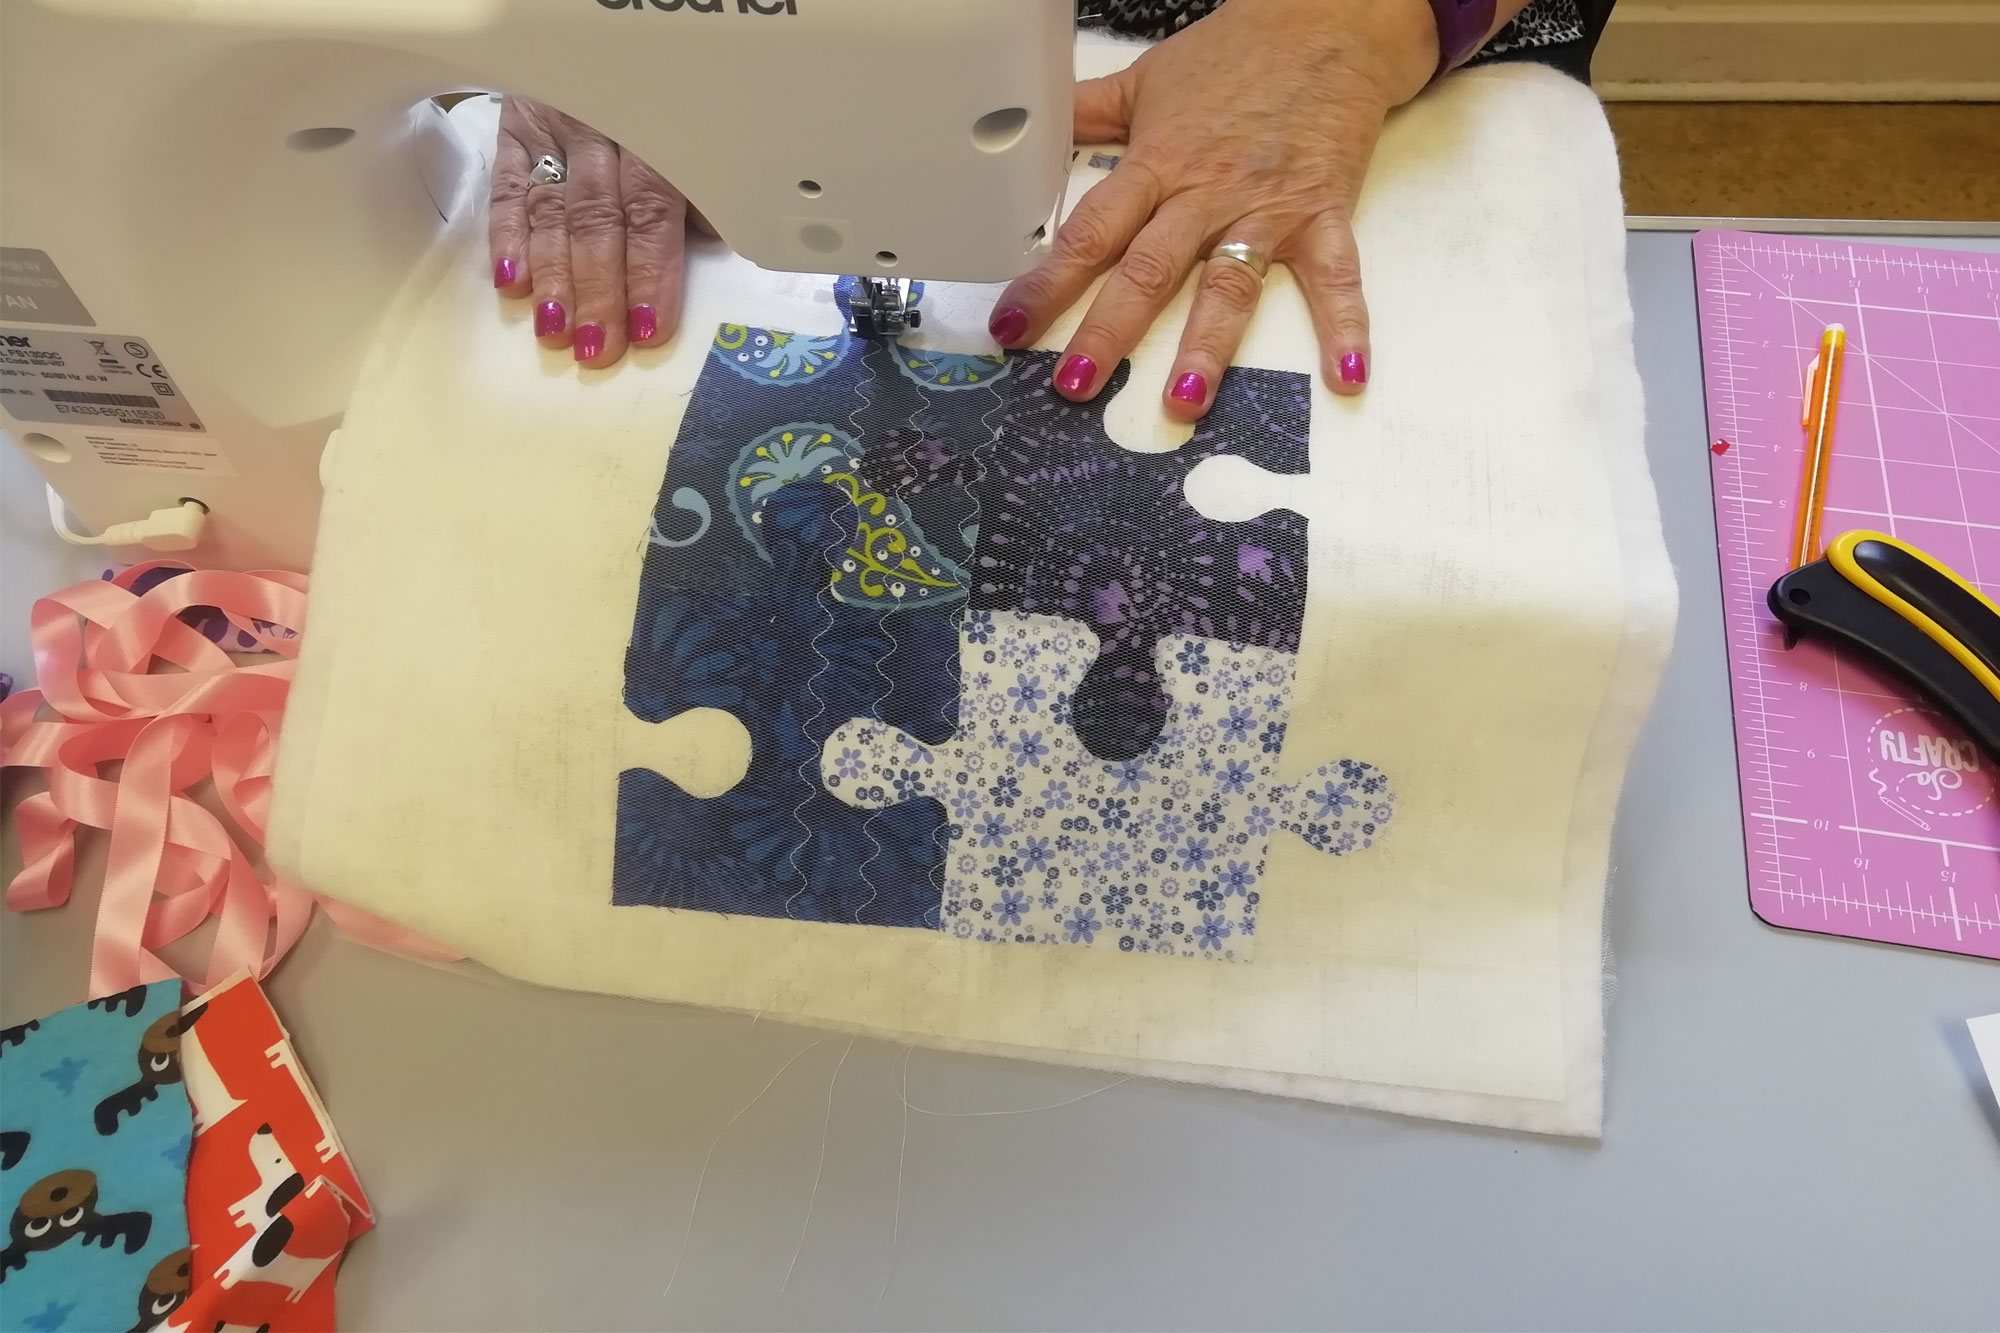 Making the patchwork quilt